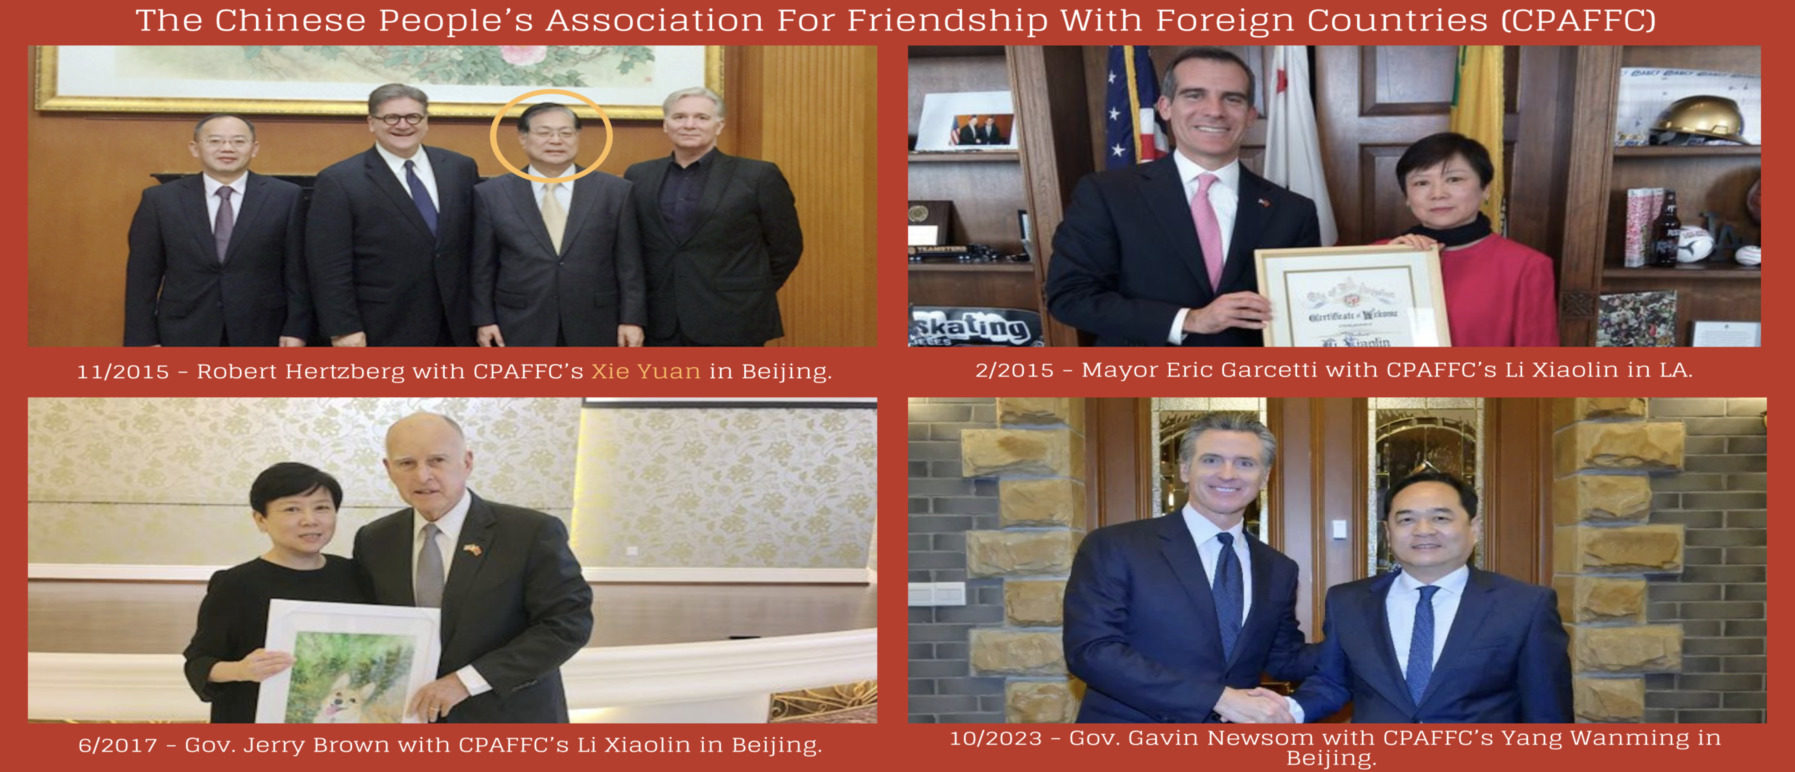 [Image created by the DCNF using pics from the archived website of the Chinese People's Association For Friendship With Foreign Countries]